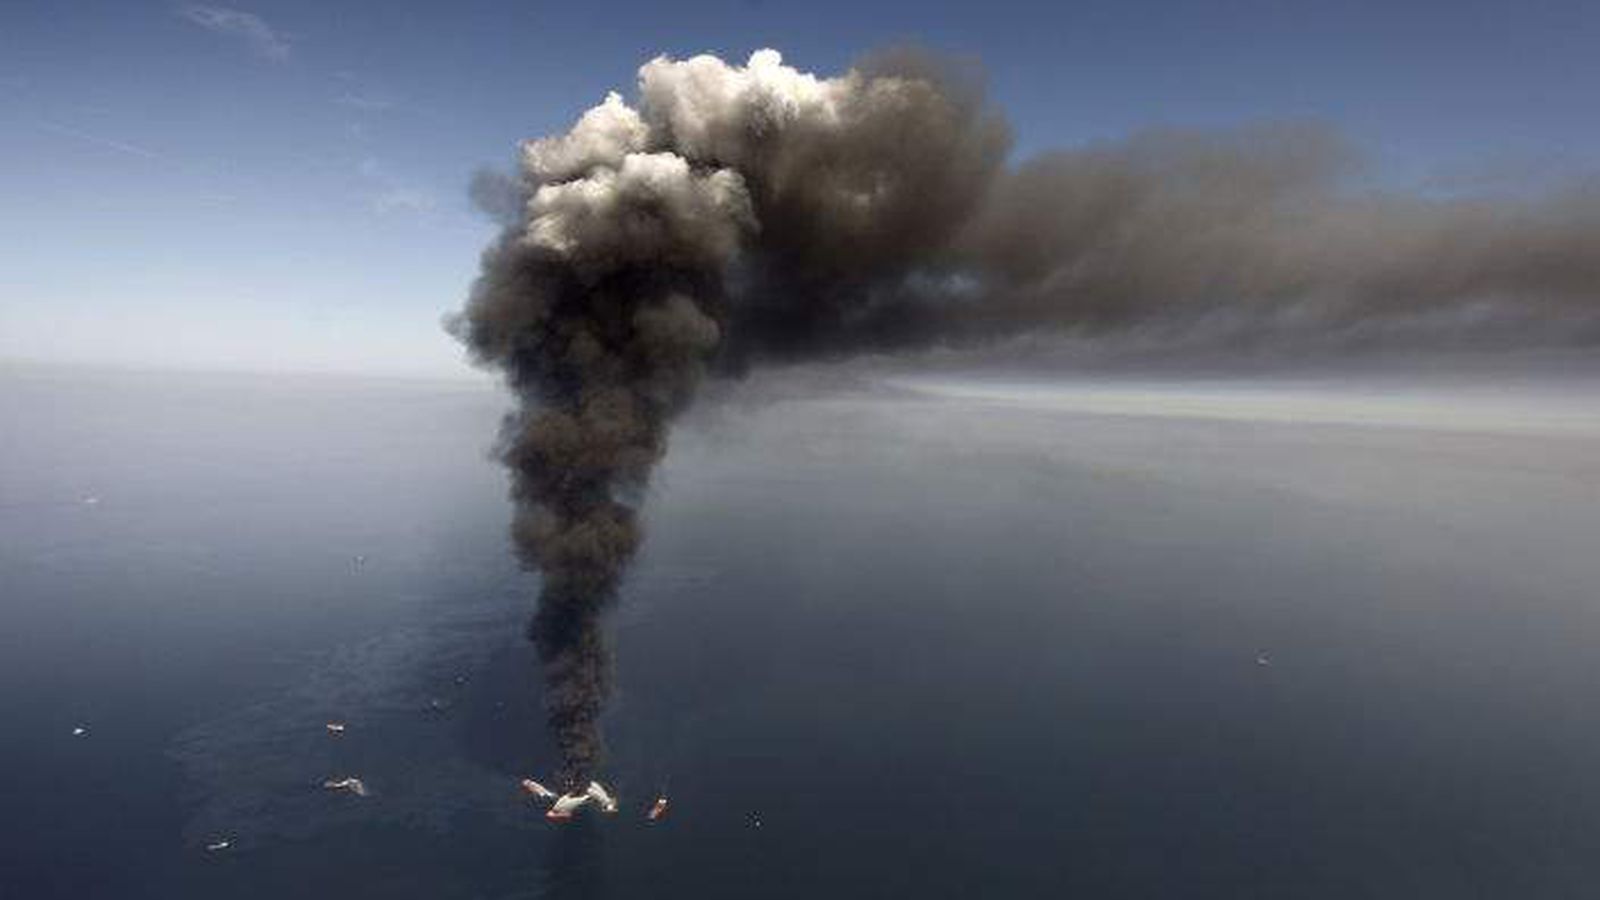 Oil drilling to begin again near site of 2010 Deepwater Horizon disaster in Gulf of Mexico